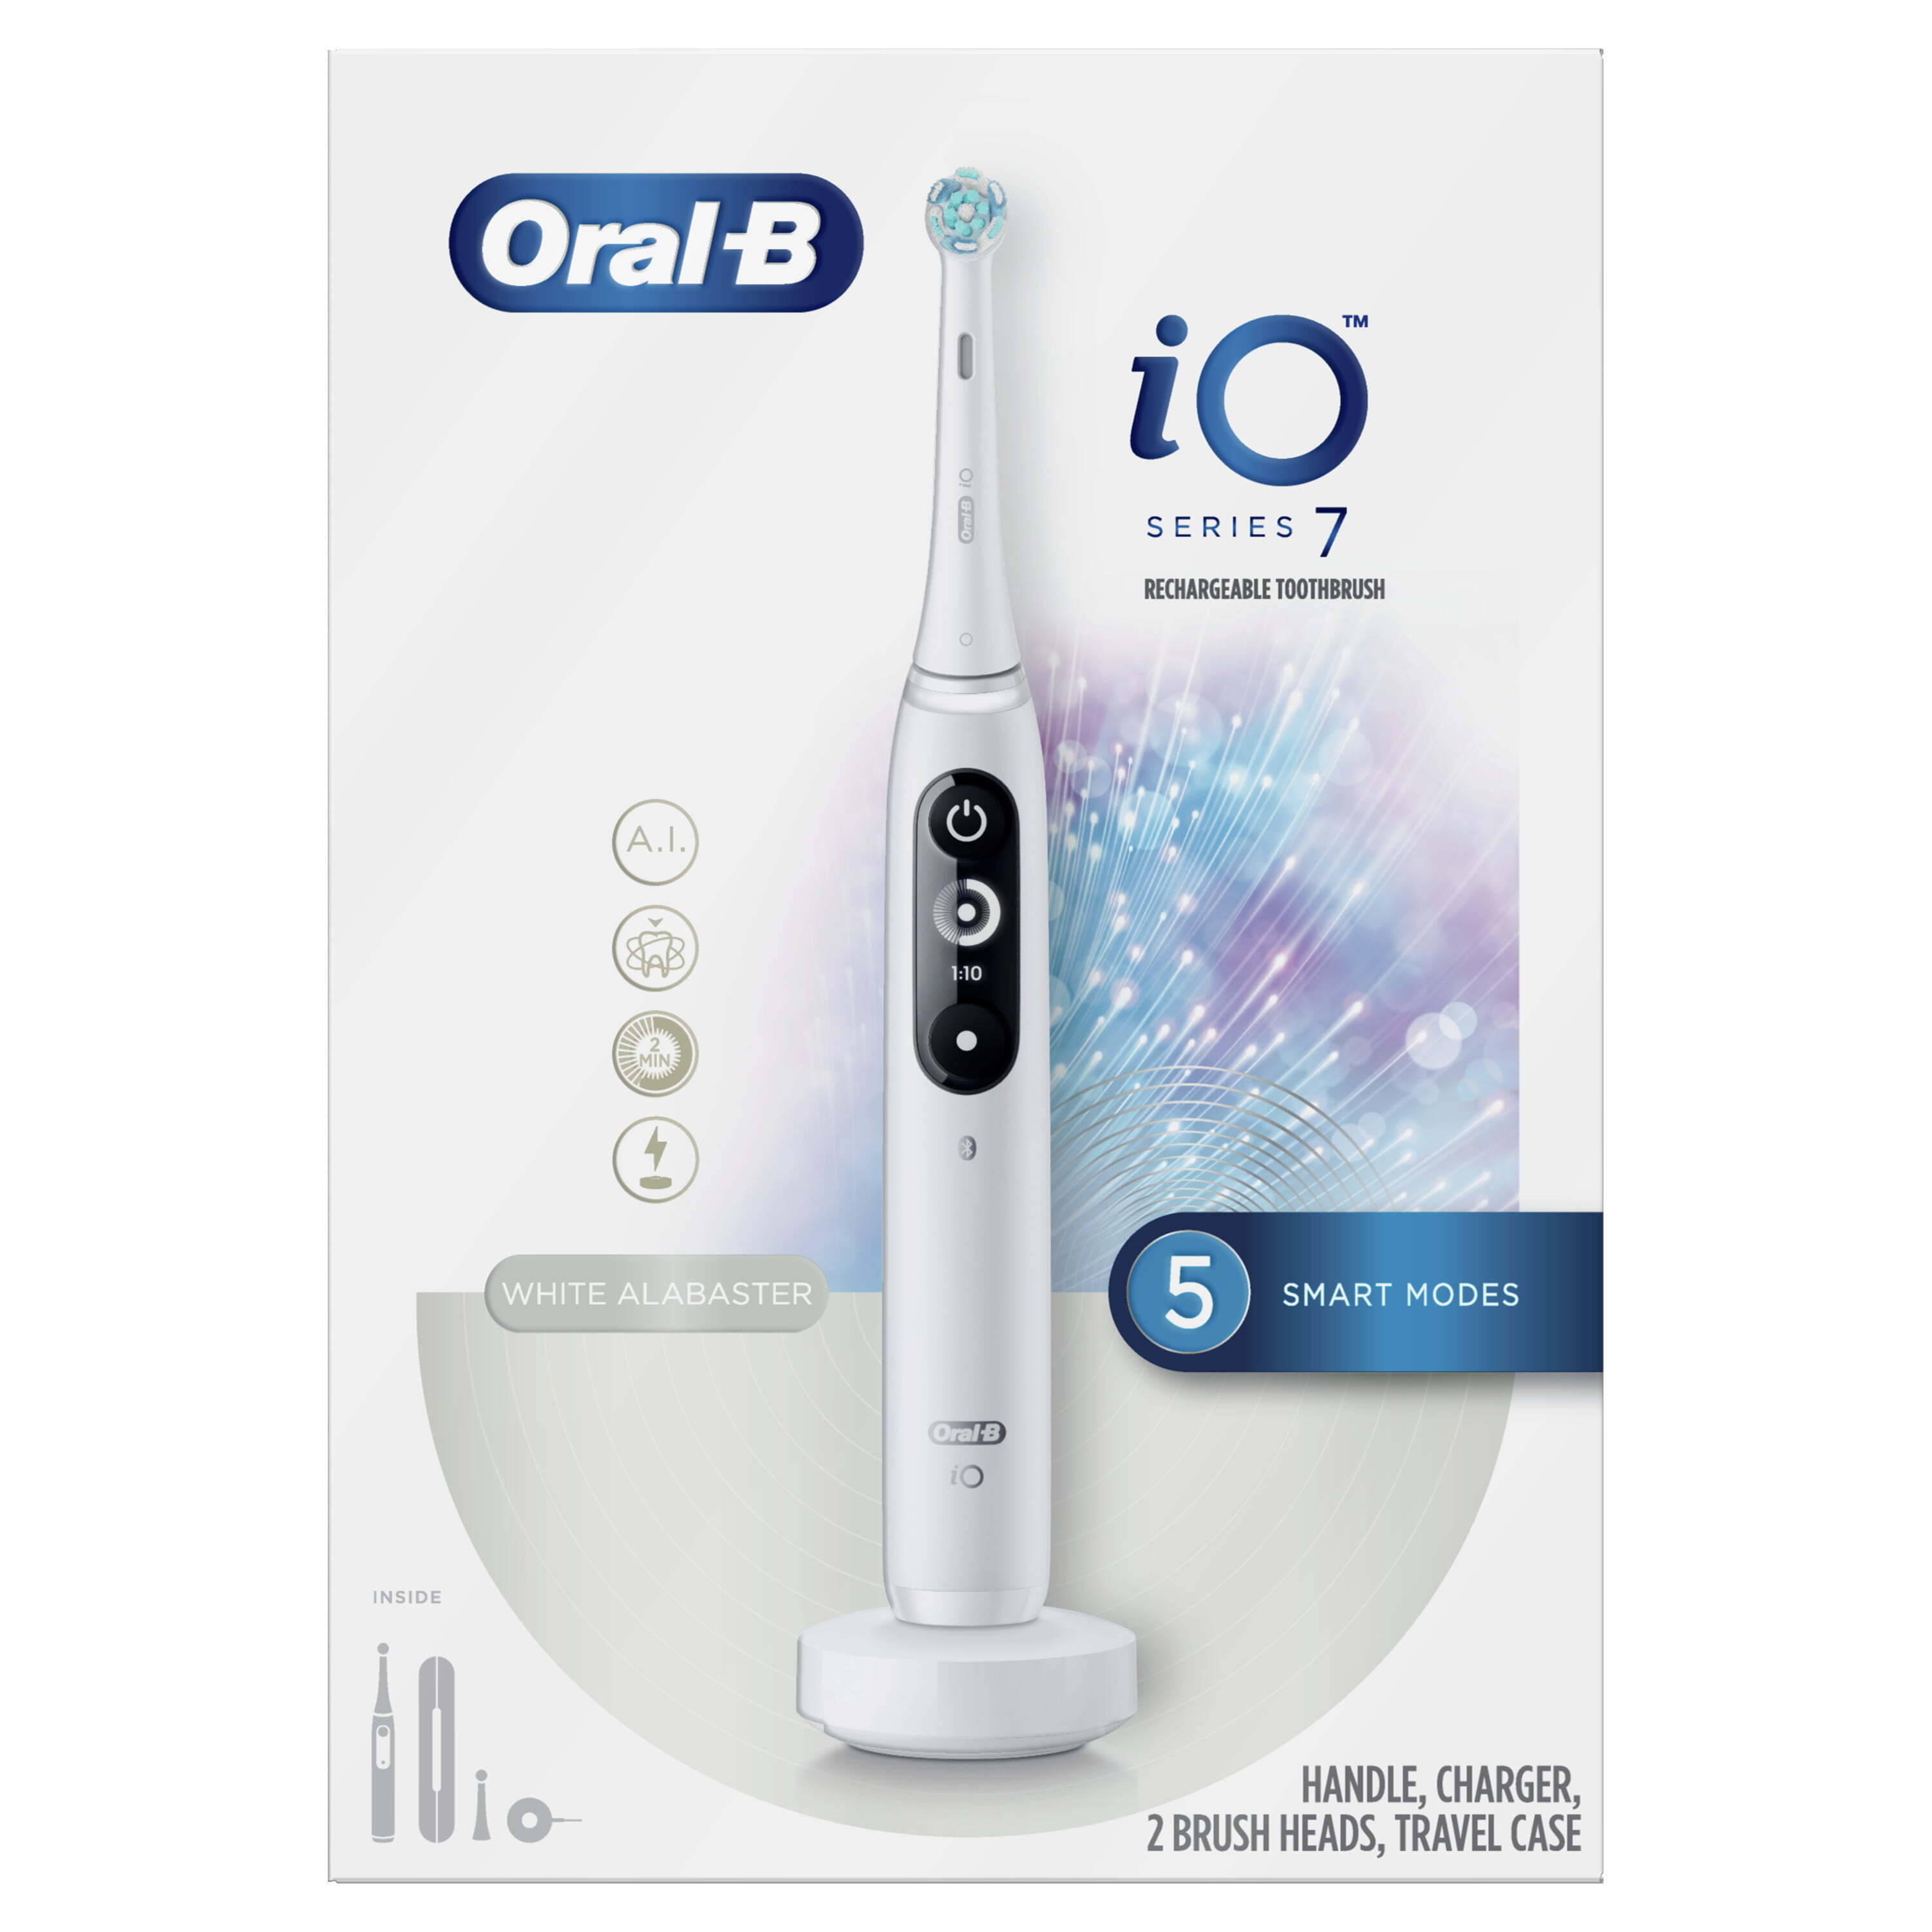 Oral-B iO Series 7 Electric Toothbrush, 2 Brush Heads, White Alabster, for Adults and Children 3+ - image 2 of 16